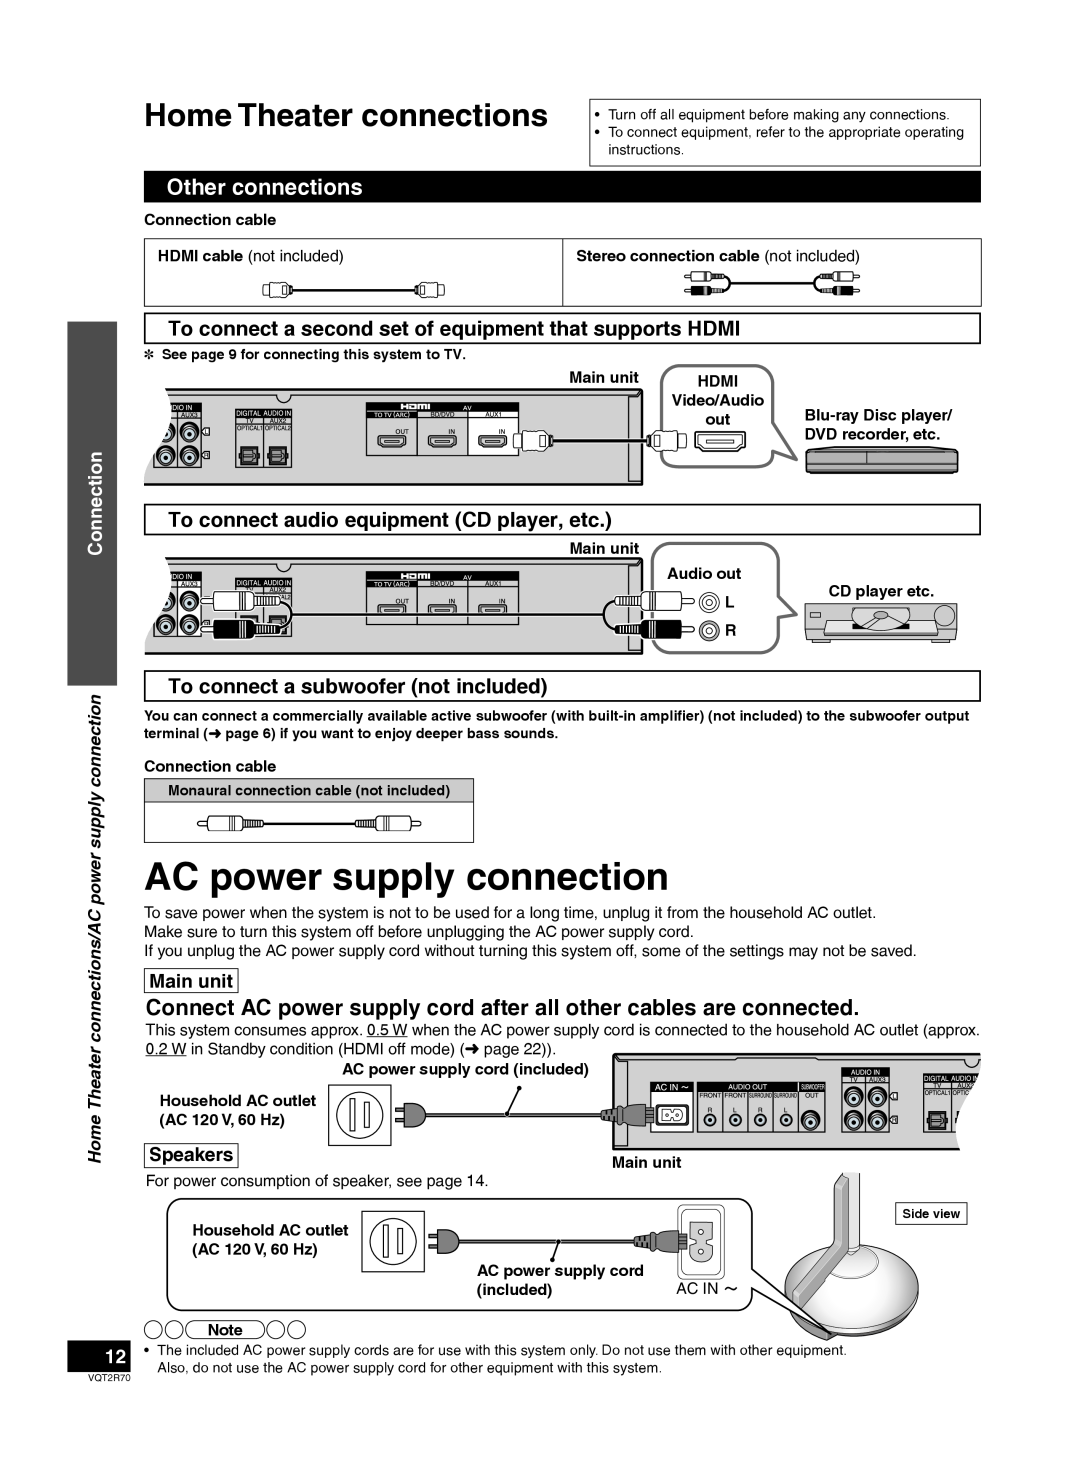 Panasonic SC-ZT2 AC power supply connection, Other connections, To connect audio equipment CD player, etc, Connection 